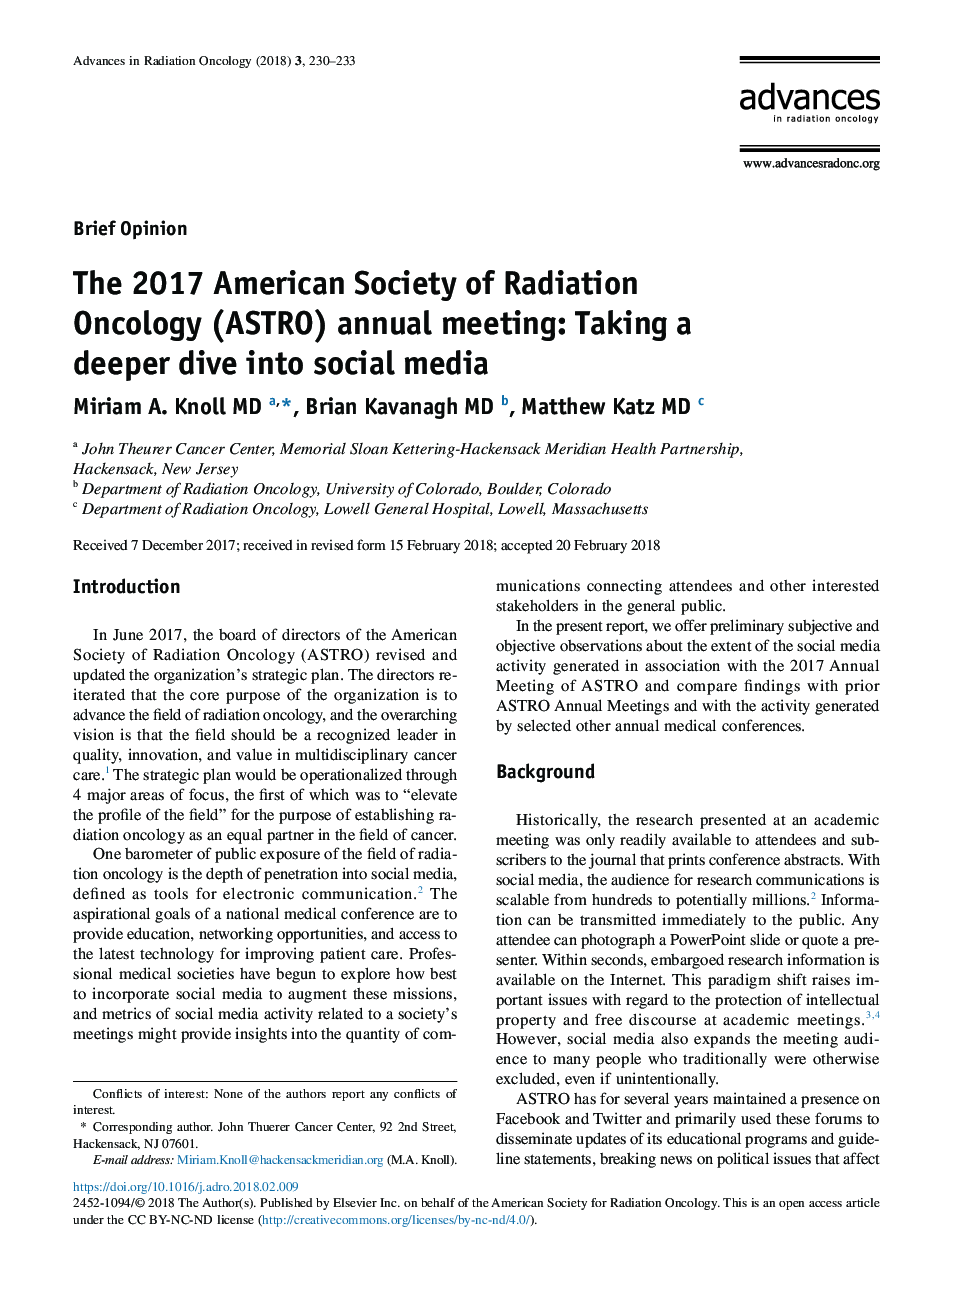 The 2017 American Society of Radiation Oncology (ASTRO) annual meeting: Taking a deeper dive into social media